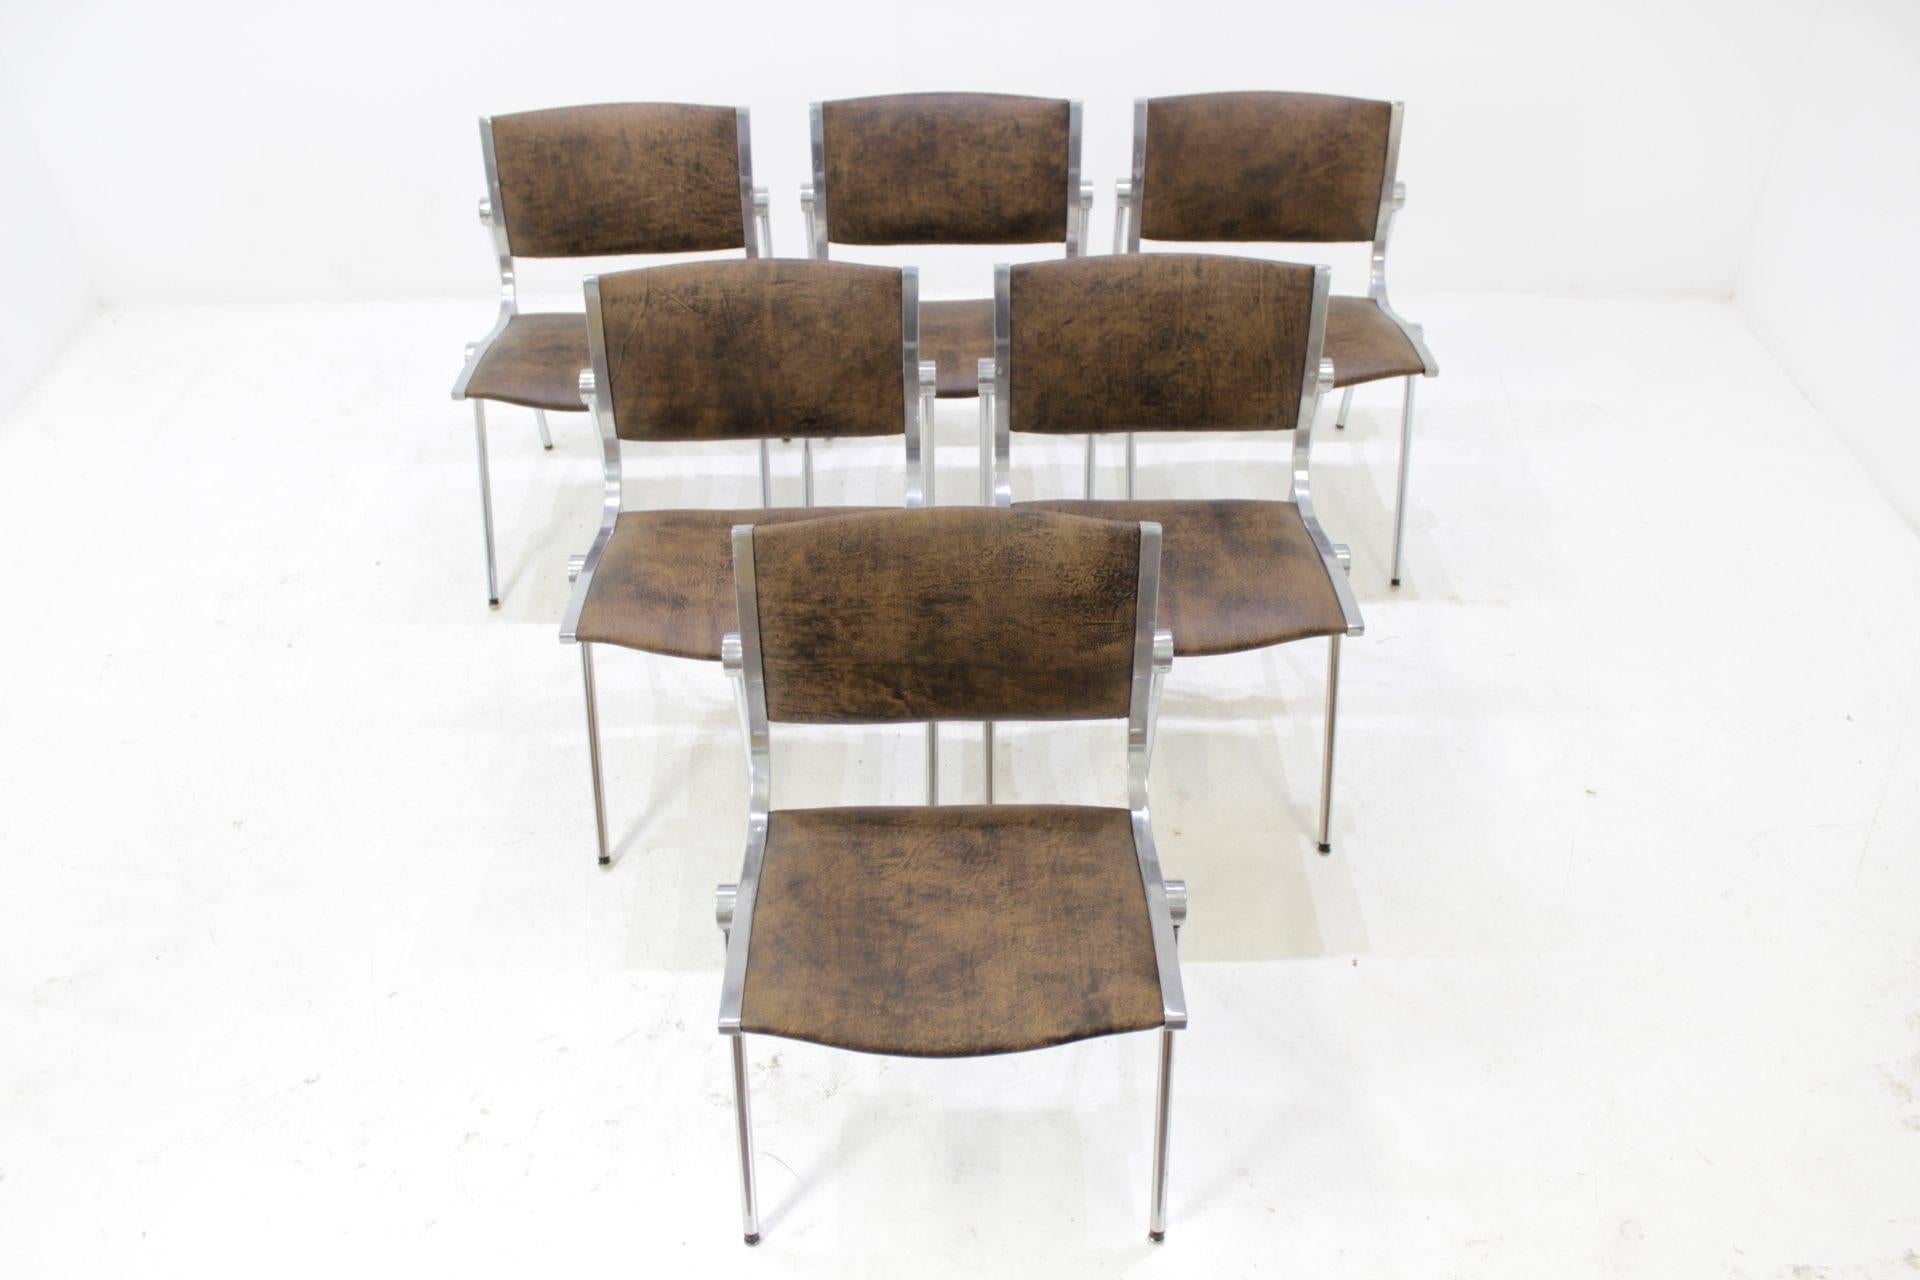 This set of rare aluminium dining chairs were produced in 1960s in Italy by 